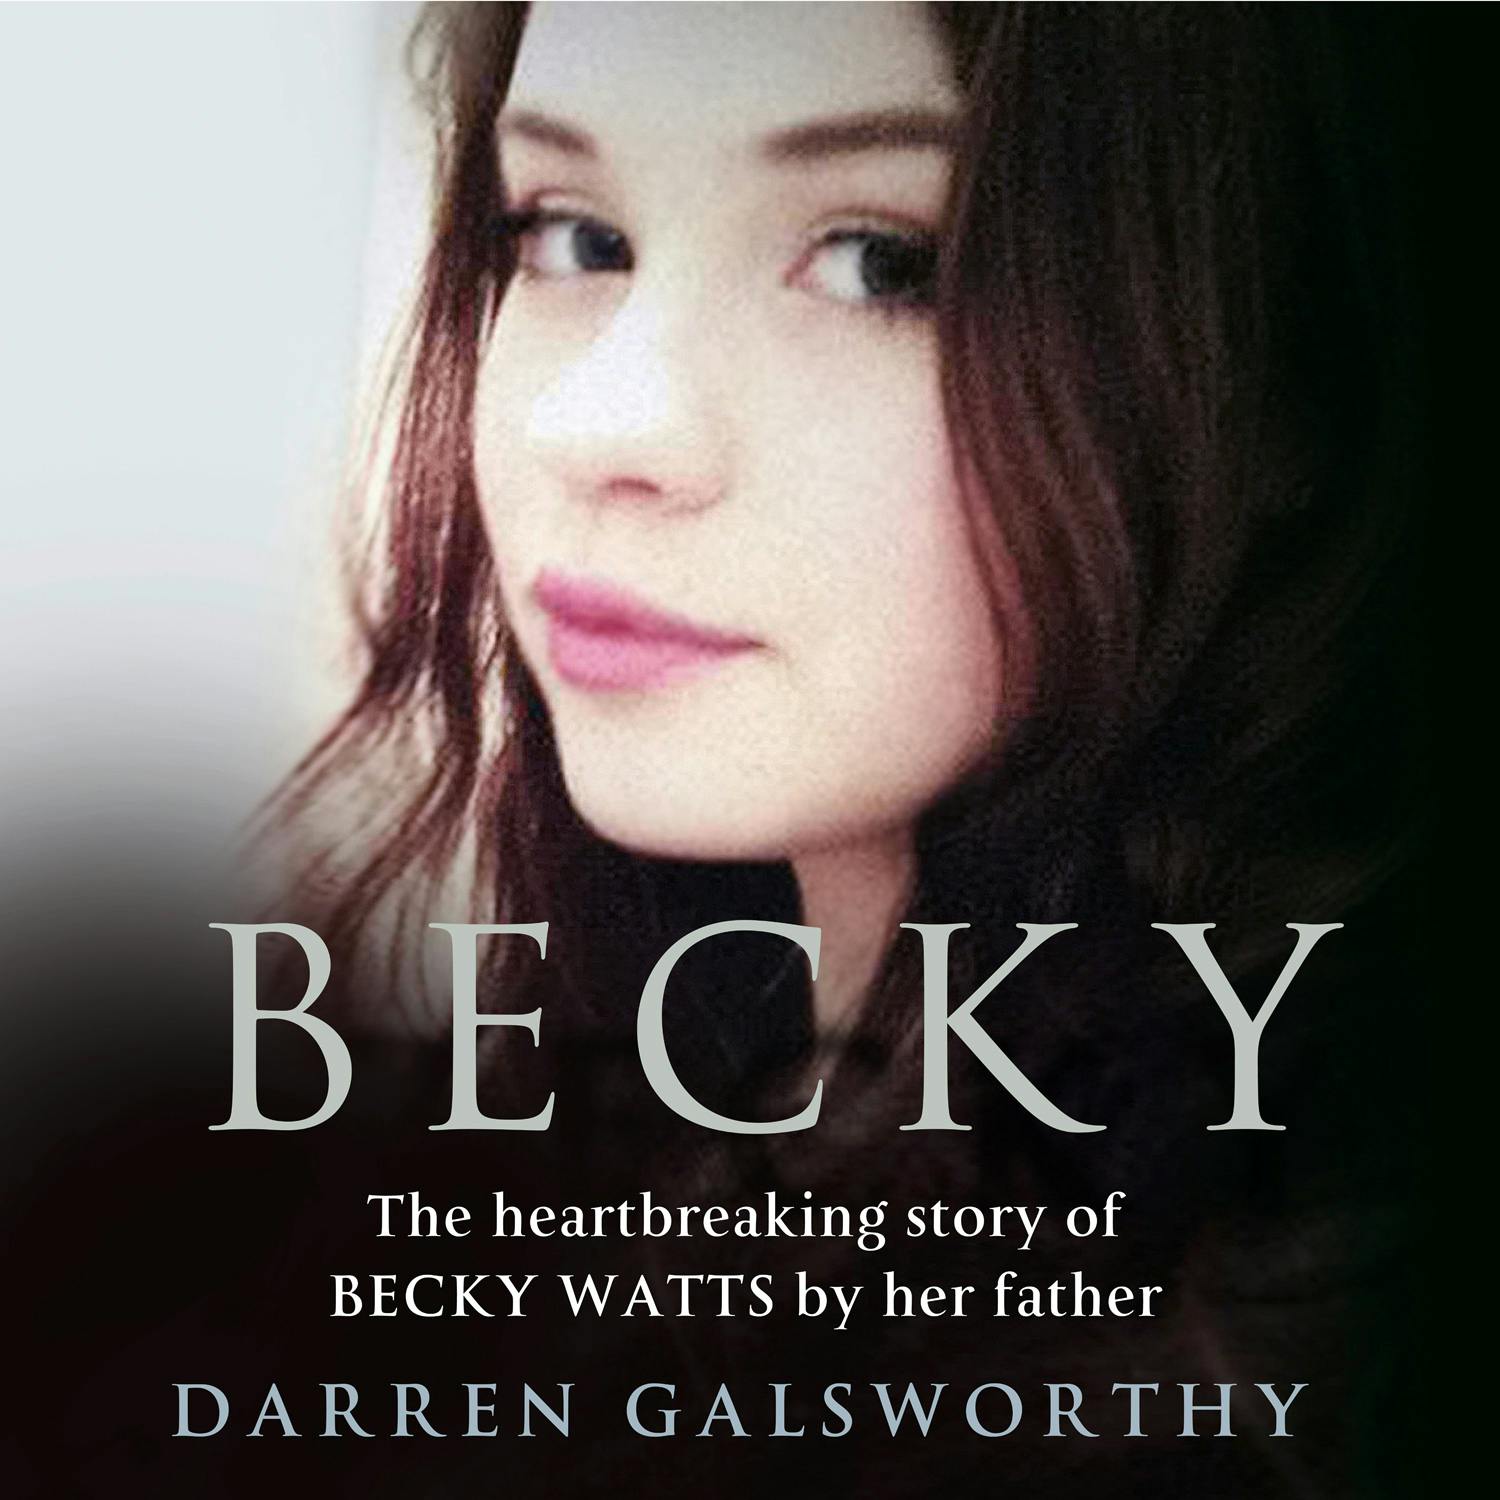 Becky: The Heartbreaking Story of Becky Watts by Her Father Darren Galsworthy - Darren Galsworthy